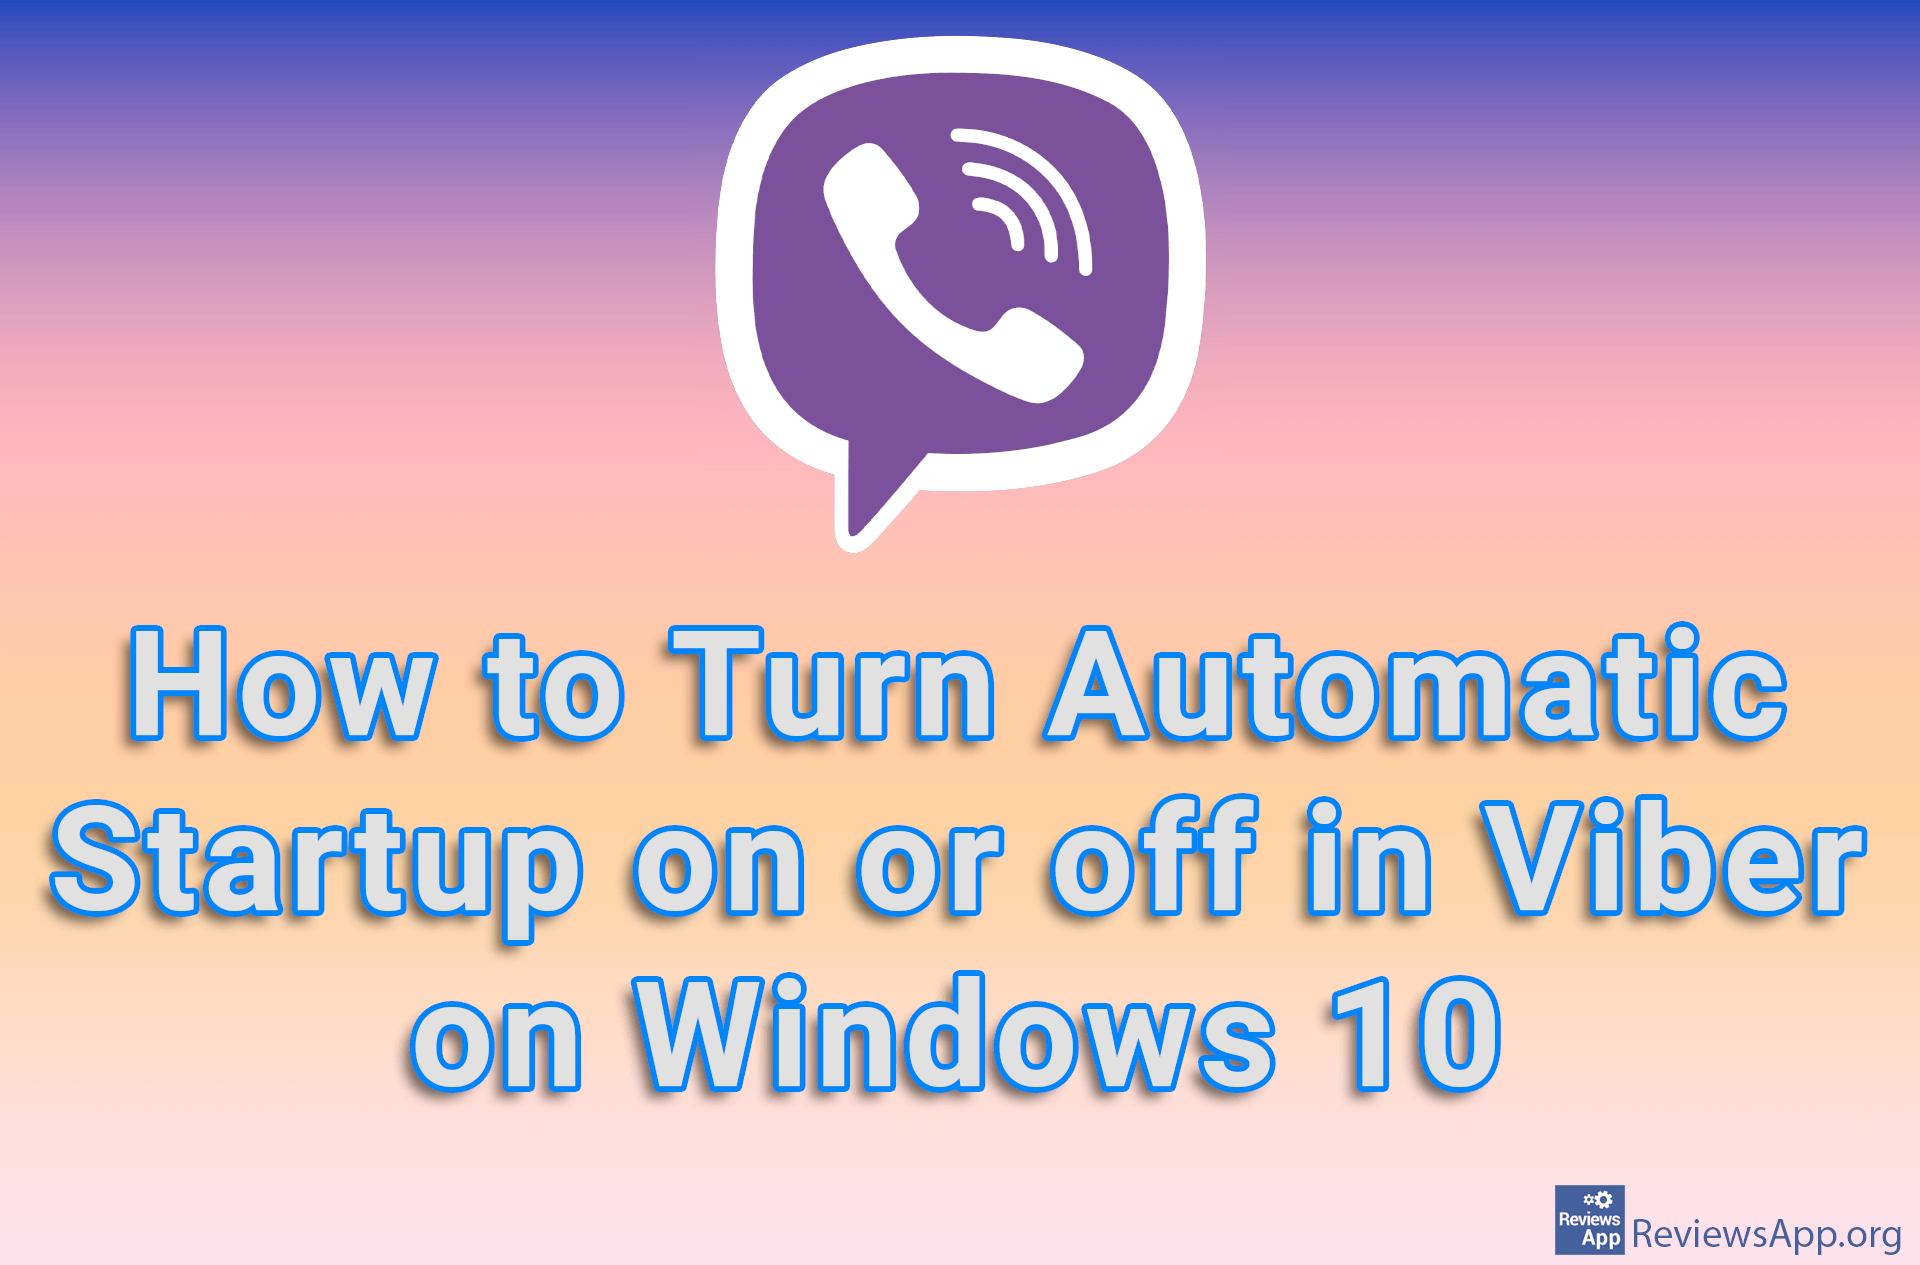 How to Turn Automatic Startup on or off in Viber on Windows 10